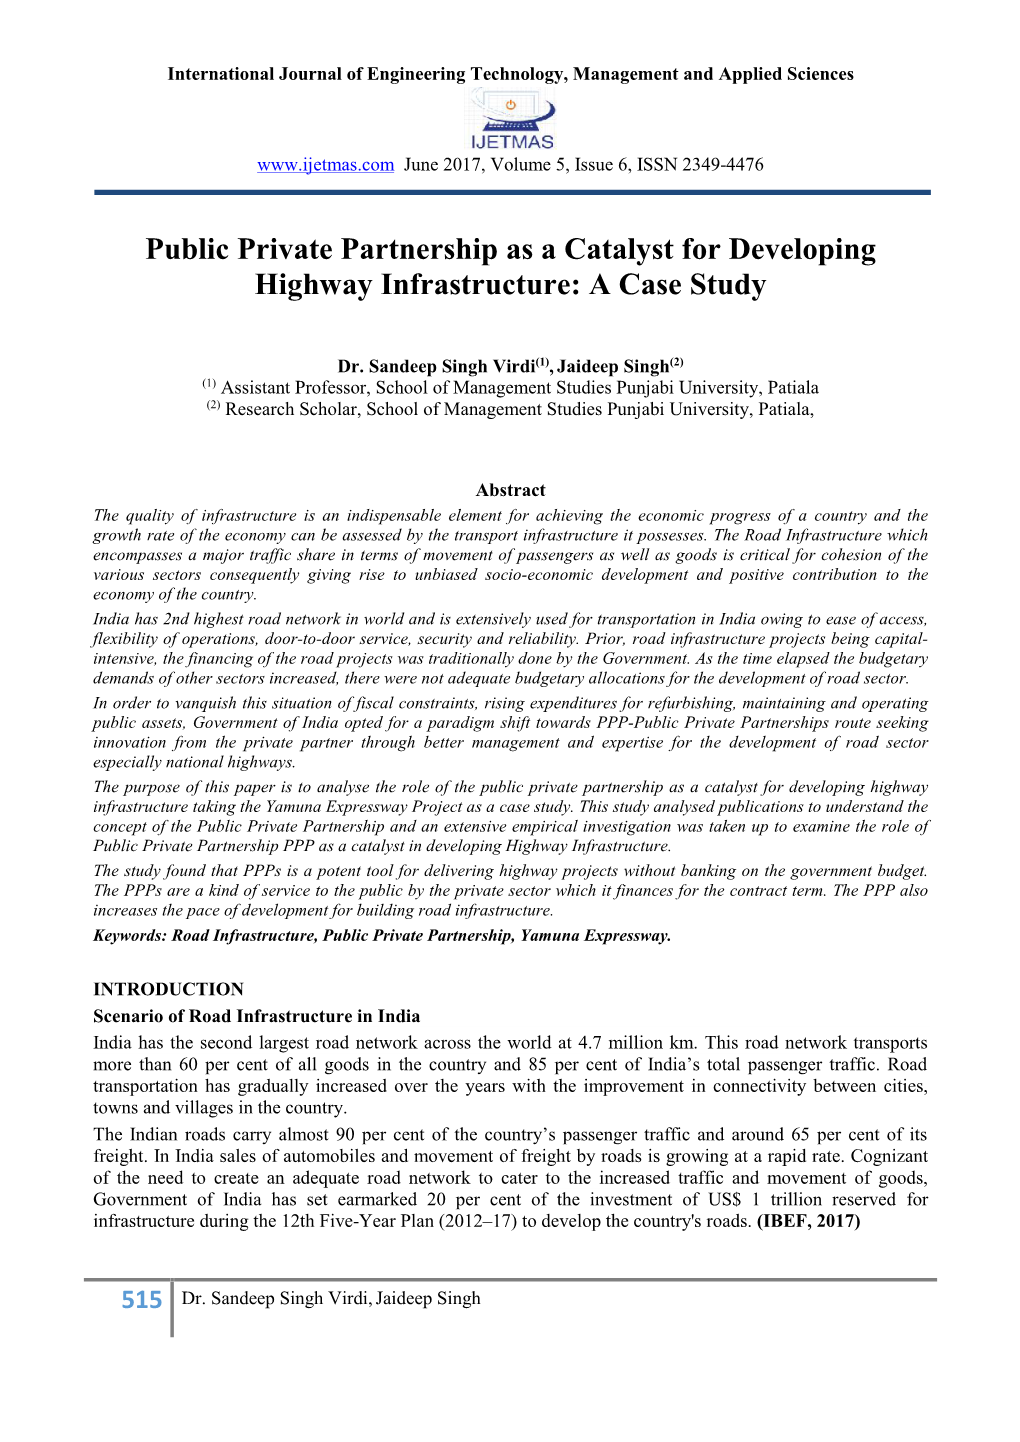 Public Private Partnership As a Catalyst for Developing Highway Infrastructure: a Case Study